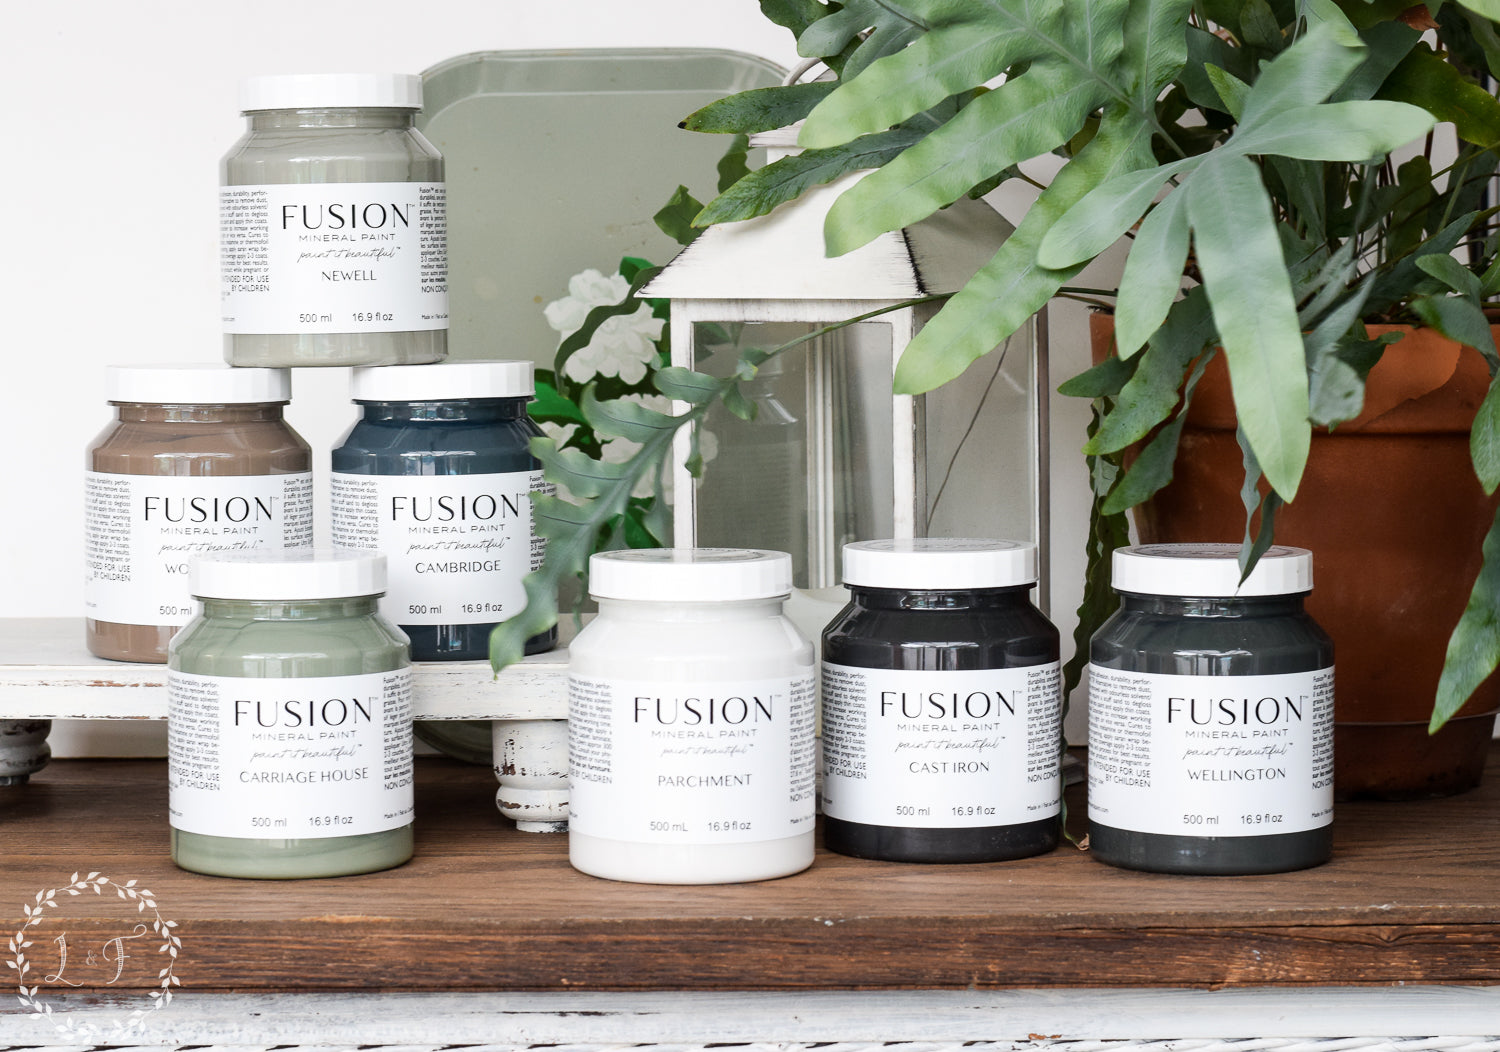 Fusion Mineral Paint Newell, Fusion Paint Newell